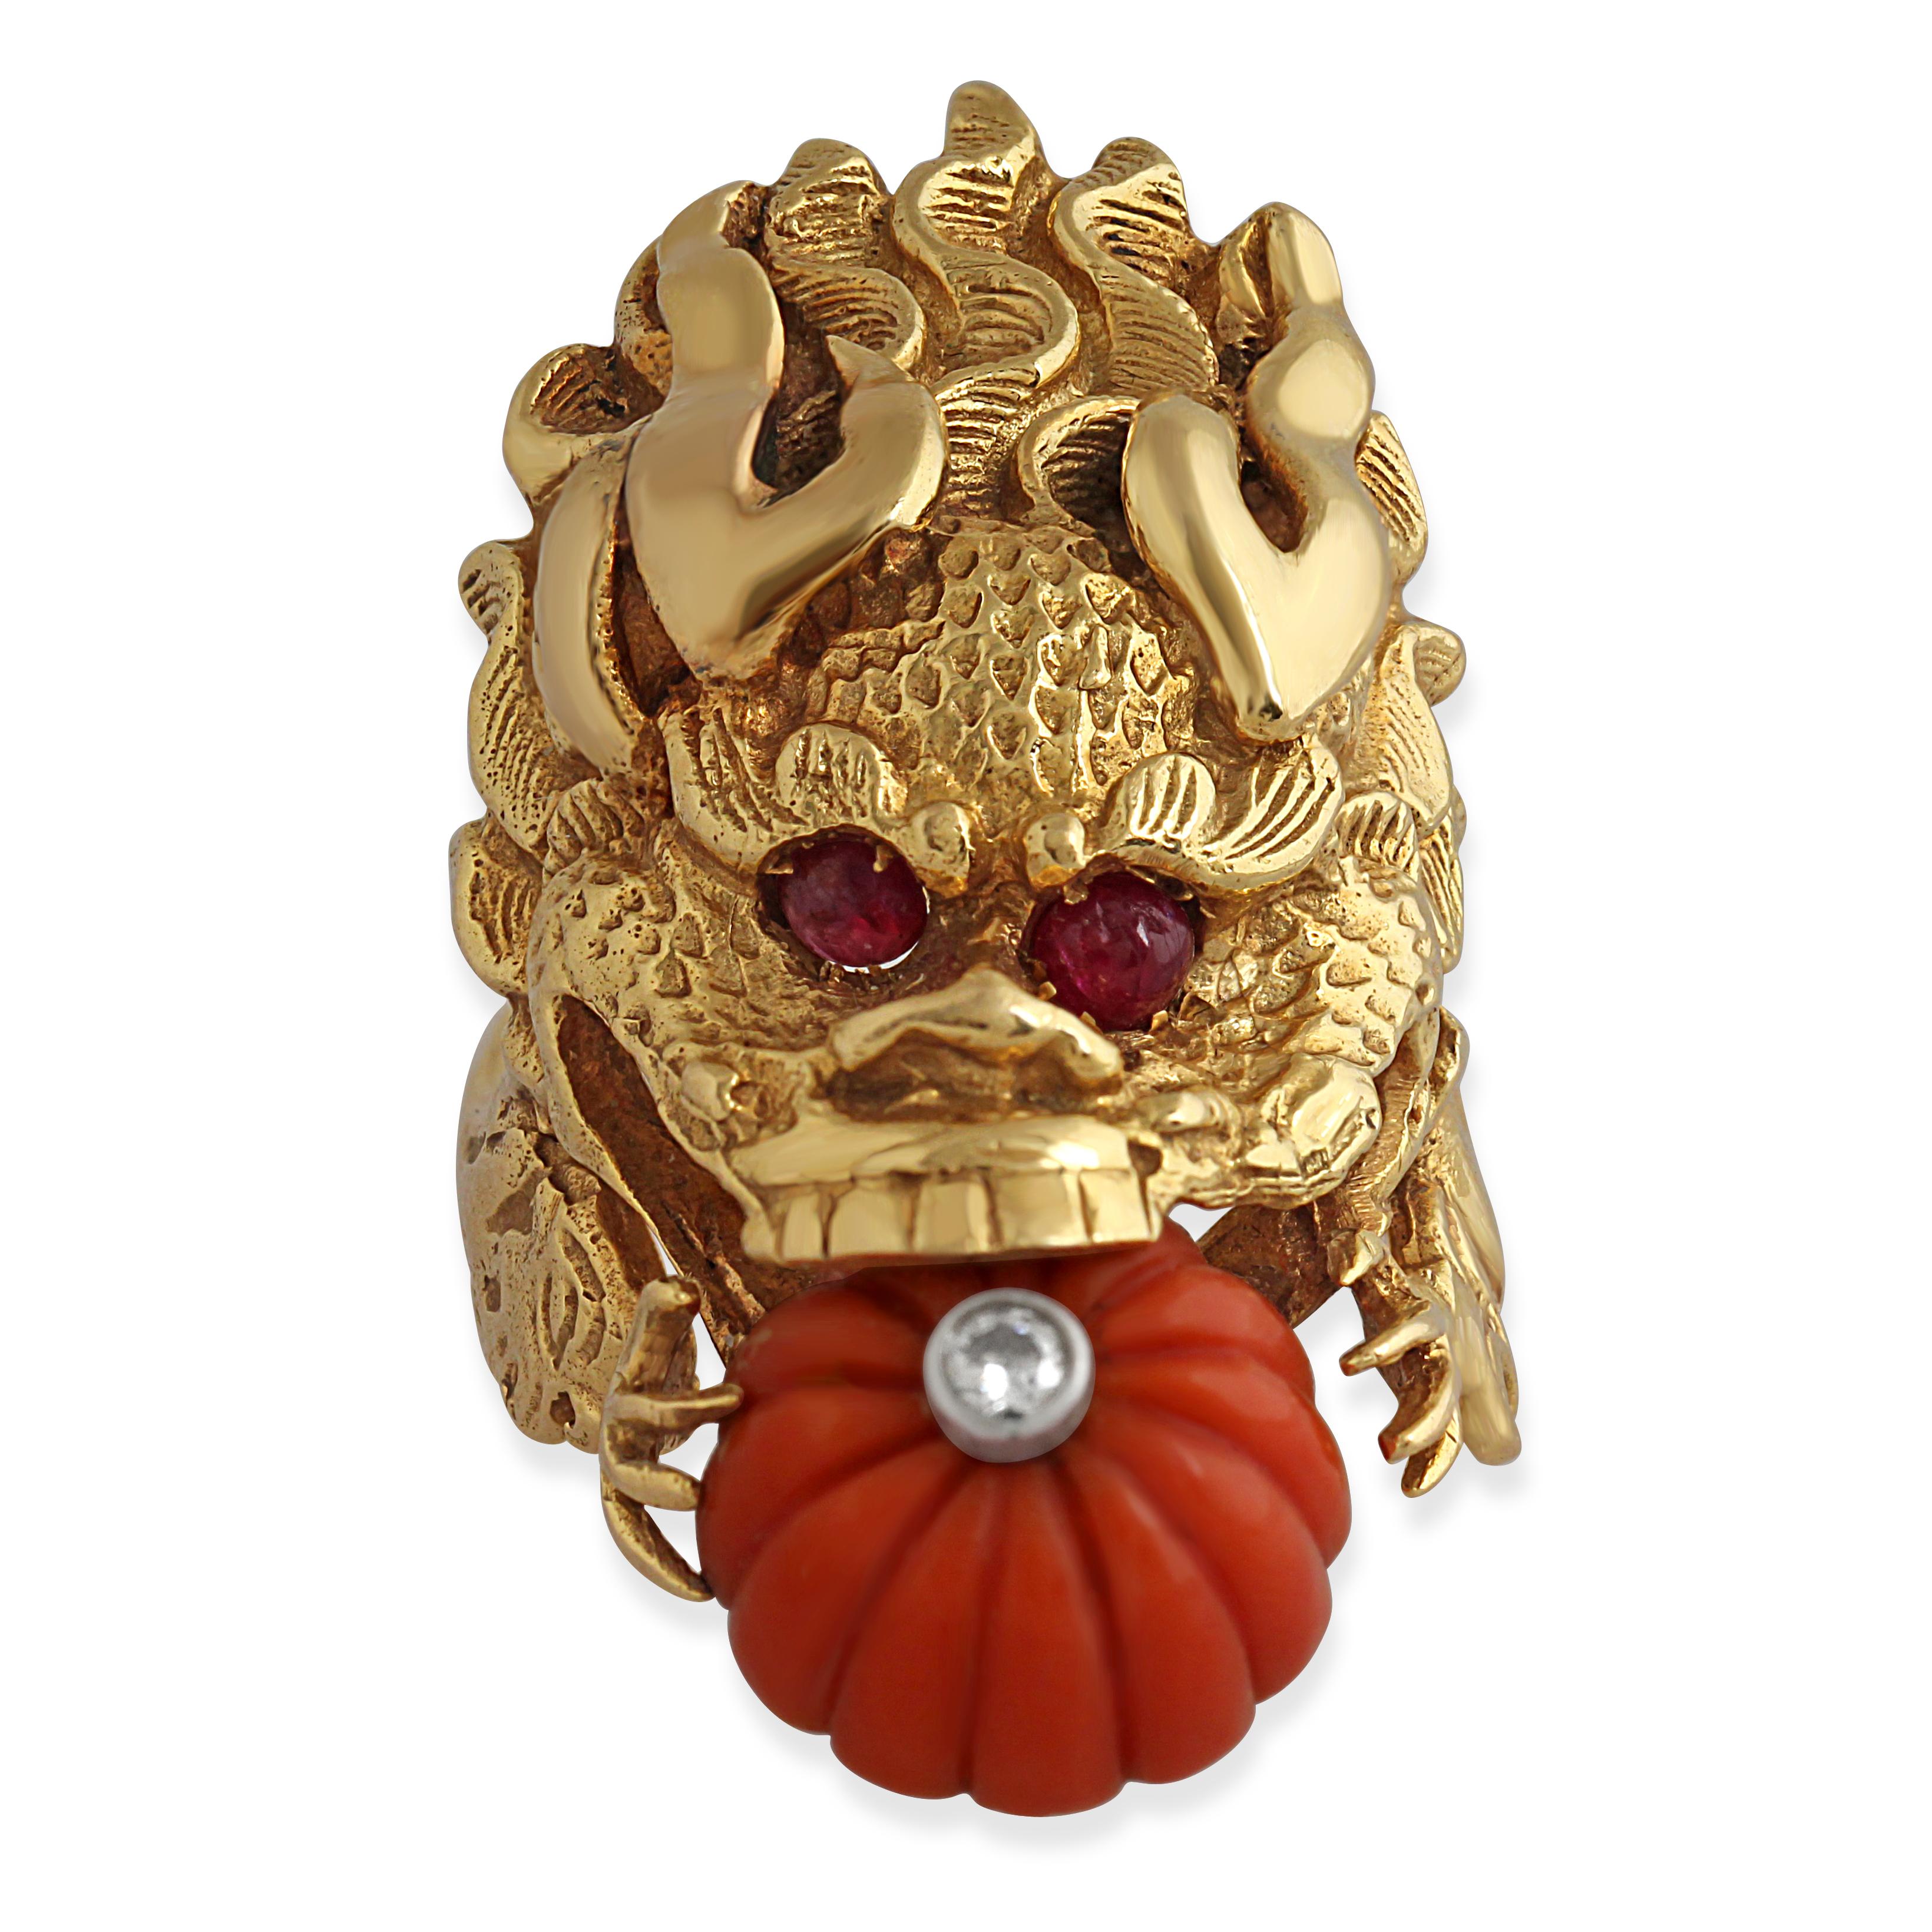 A rare dragon ring by Van Cleef & Arpels. Crafted from 18k yellow gold with a melon-cut coral bead in the mouth of the dragon set with a single diamond at the centre. An exceptional and unique design. Circa 1970s.
